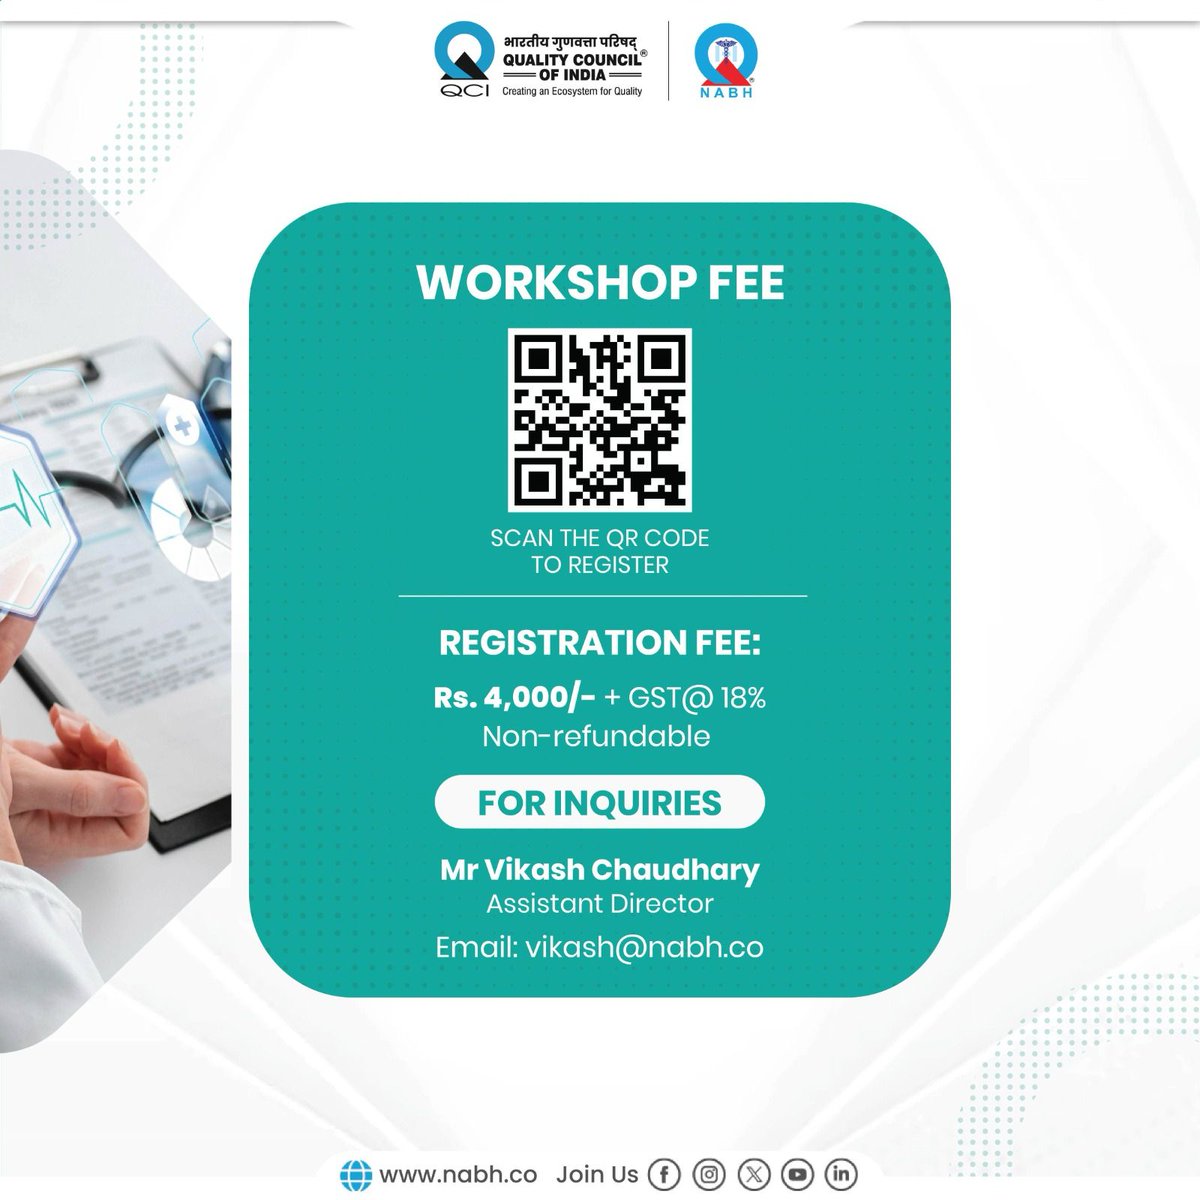 Join us for an Interactive Workshop on Documentation Requirements for Patient Safety and Quality Improvement. Gain the expertise to create essential documents for your organization and learn the hierarchy of policy, procedure, and SOPs.

Scan the QR Code to Register.